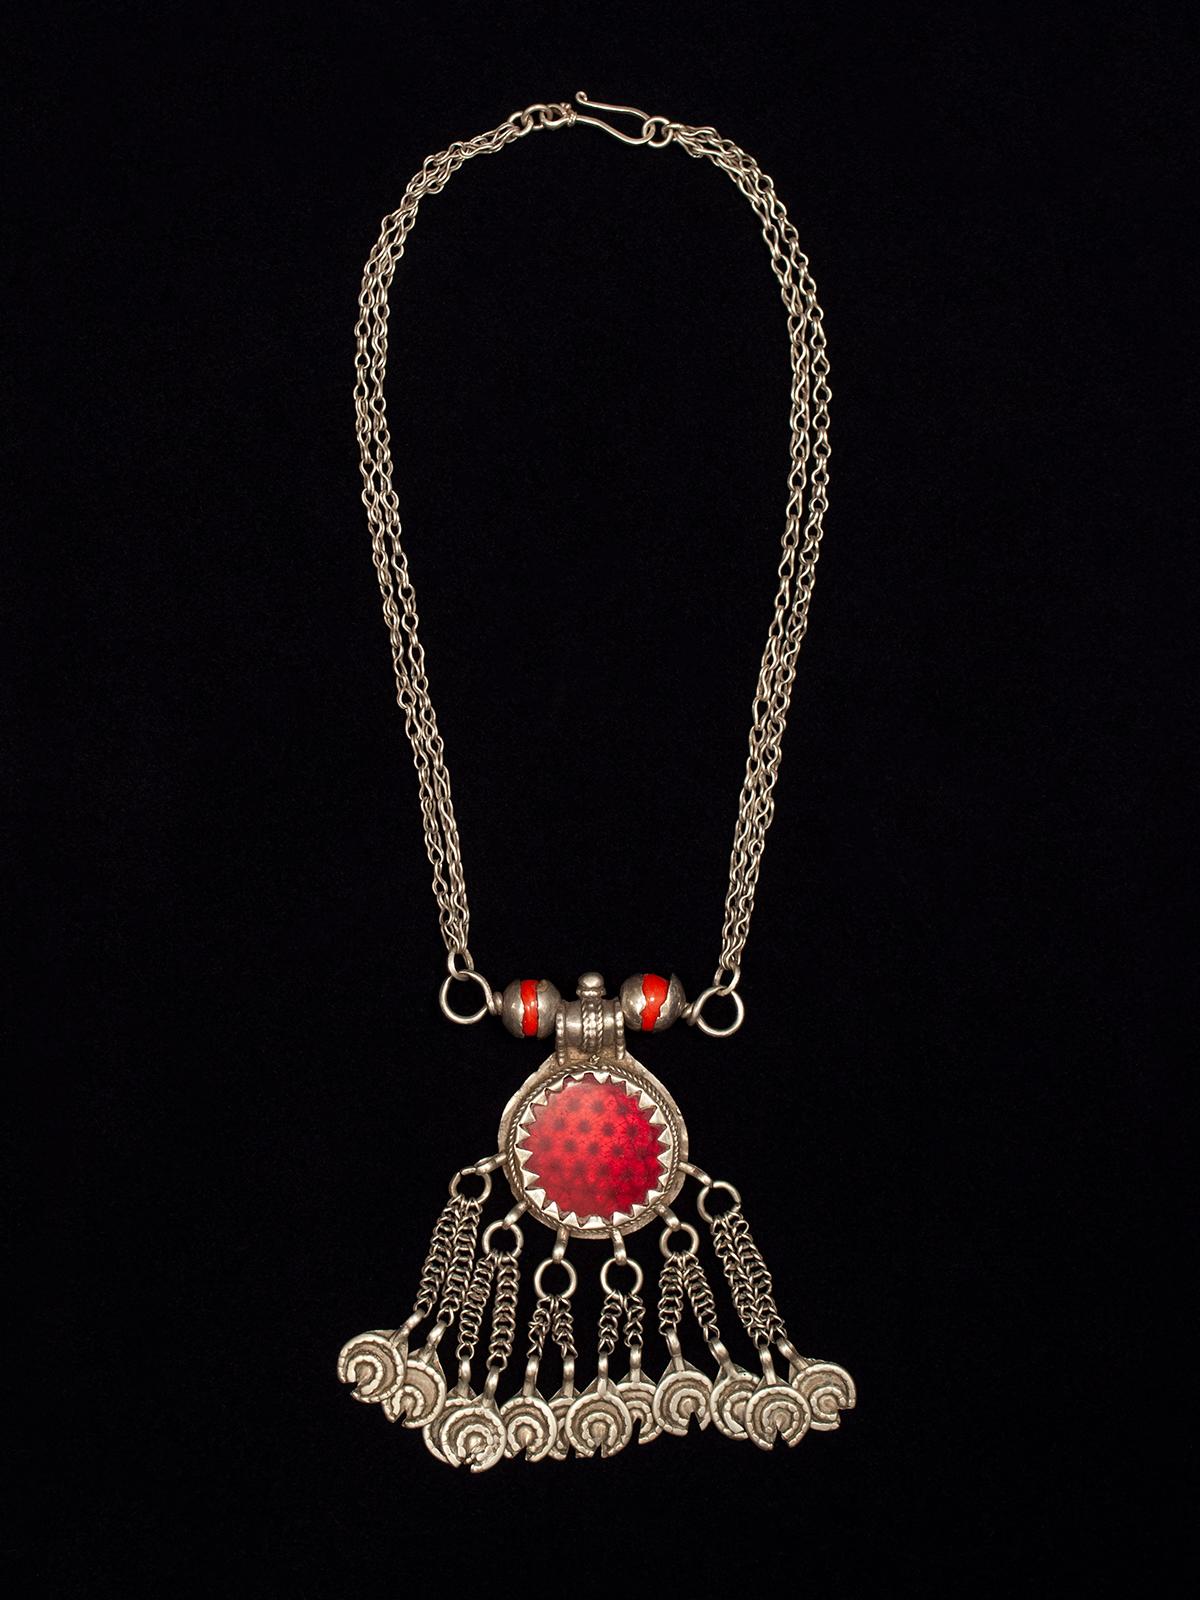 Early to mid-20th century pendant silver necklace, Yemen

This pendant necklace has an interesting center medallion of transparent red glass over a faceted sheet of silver, which gives it a reflector-like appearance. The two orange beads are wound